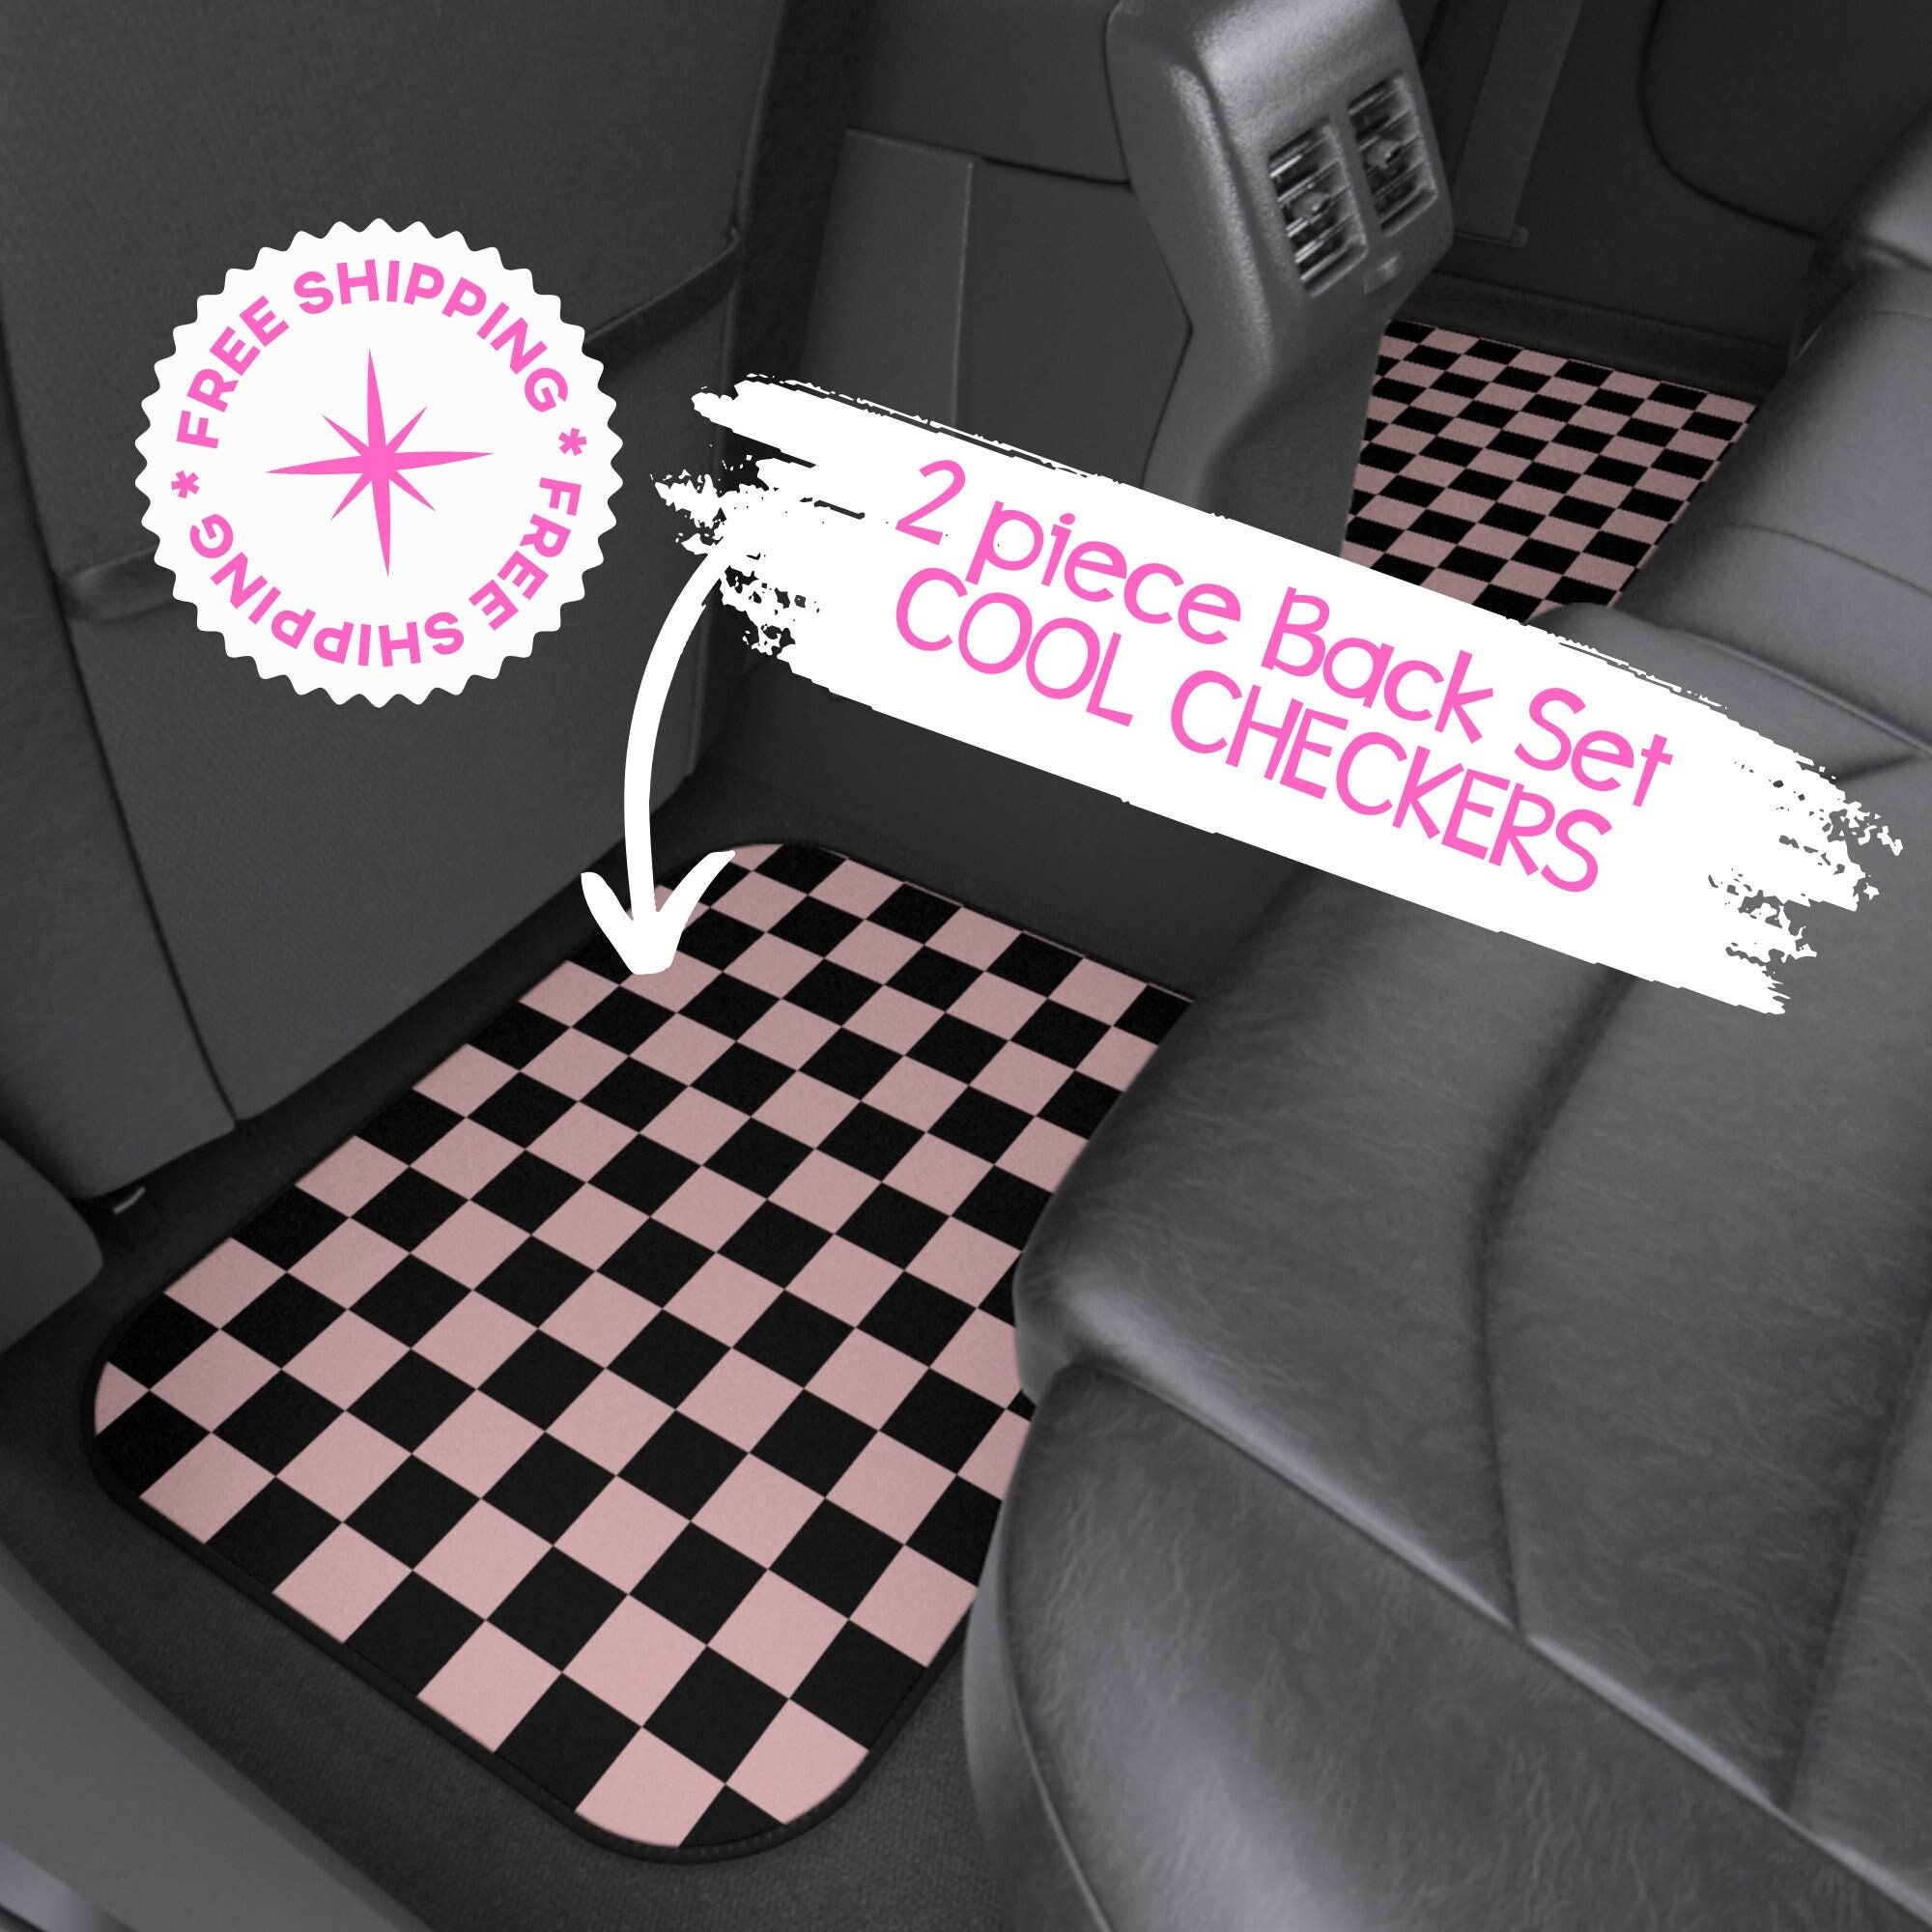 8 Cute Car Accessories to Personalize Your Vehicle